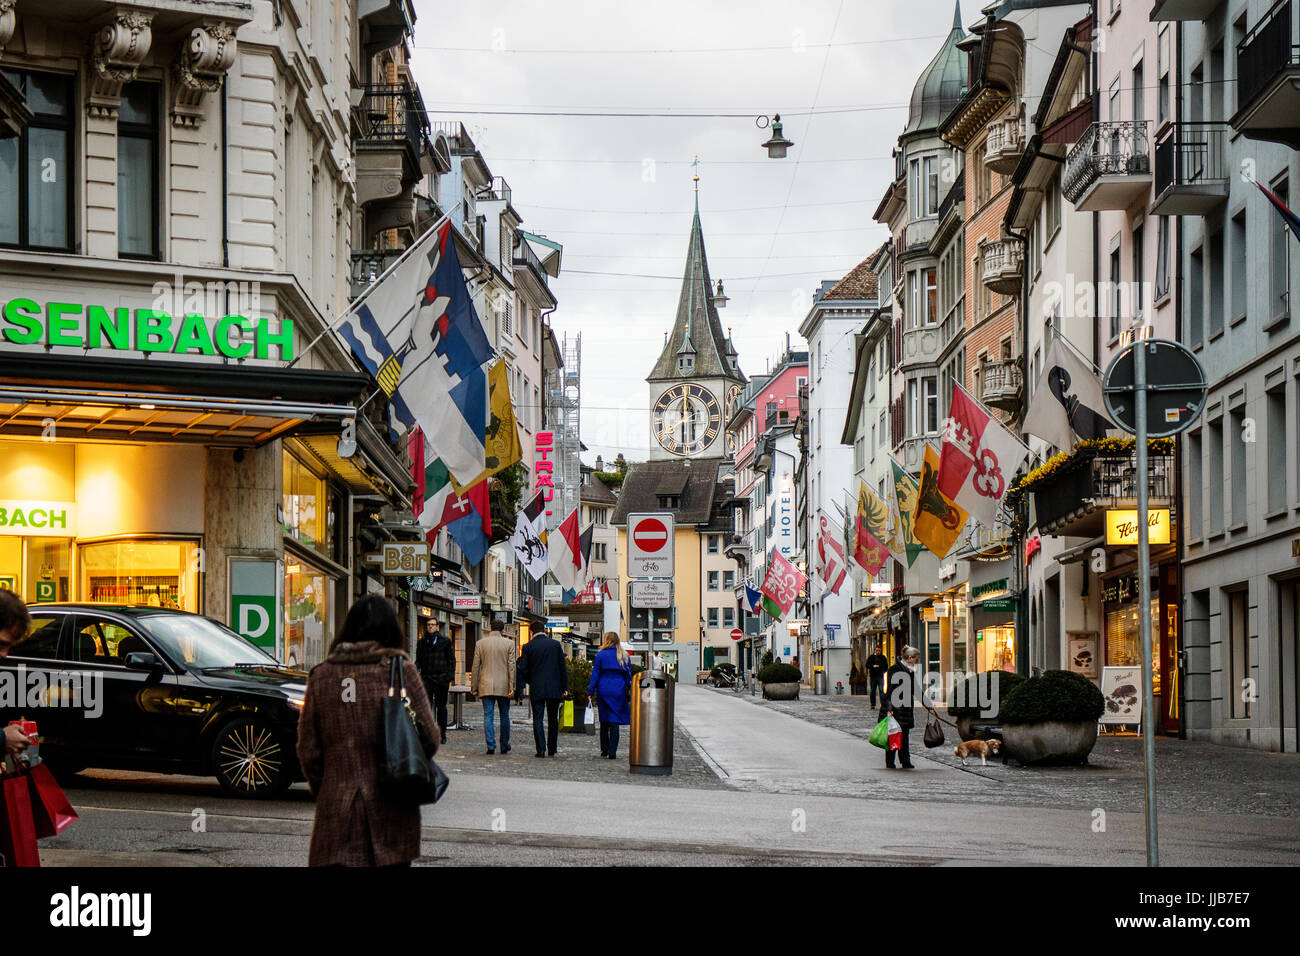 St. Peter Church clock tower, the largest clock face in Europe,  watches over the busy and historic Rennweg Street, Zurich, Switzerland. Stock Photo